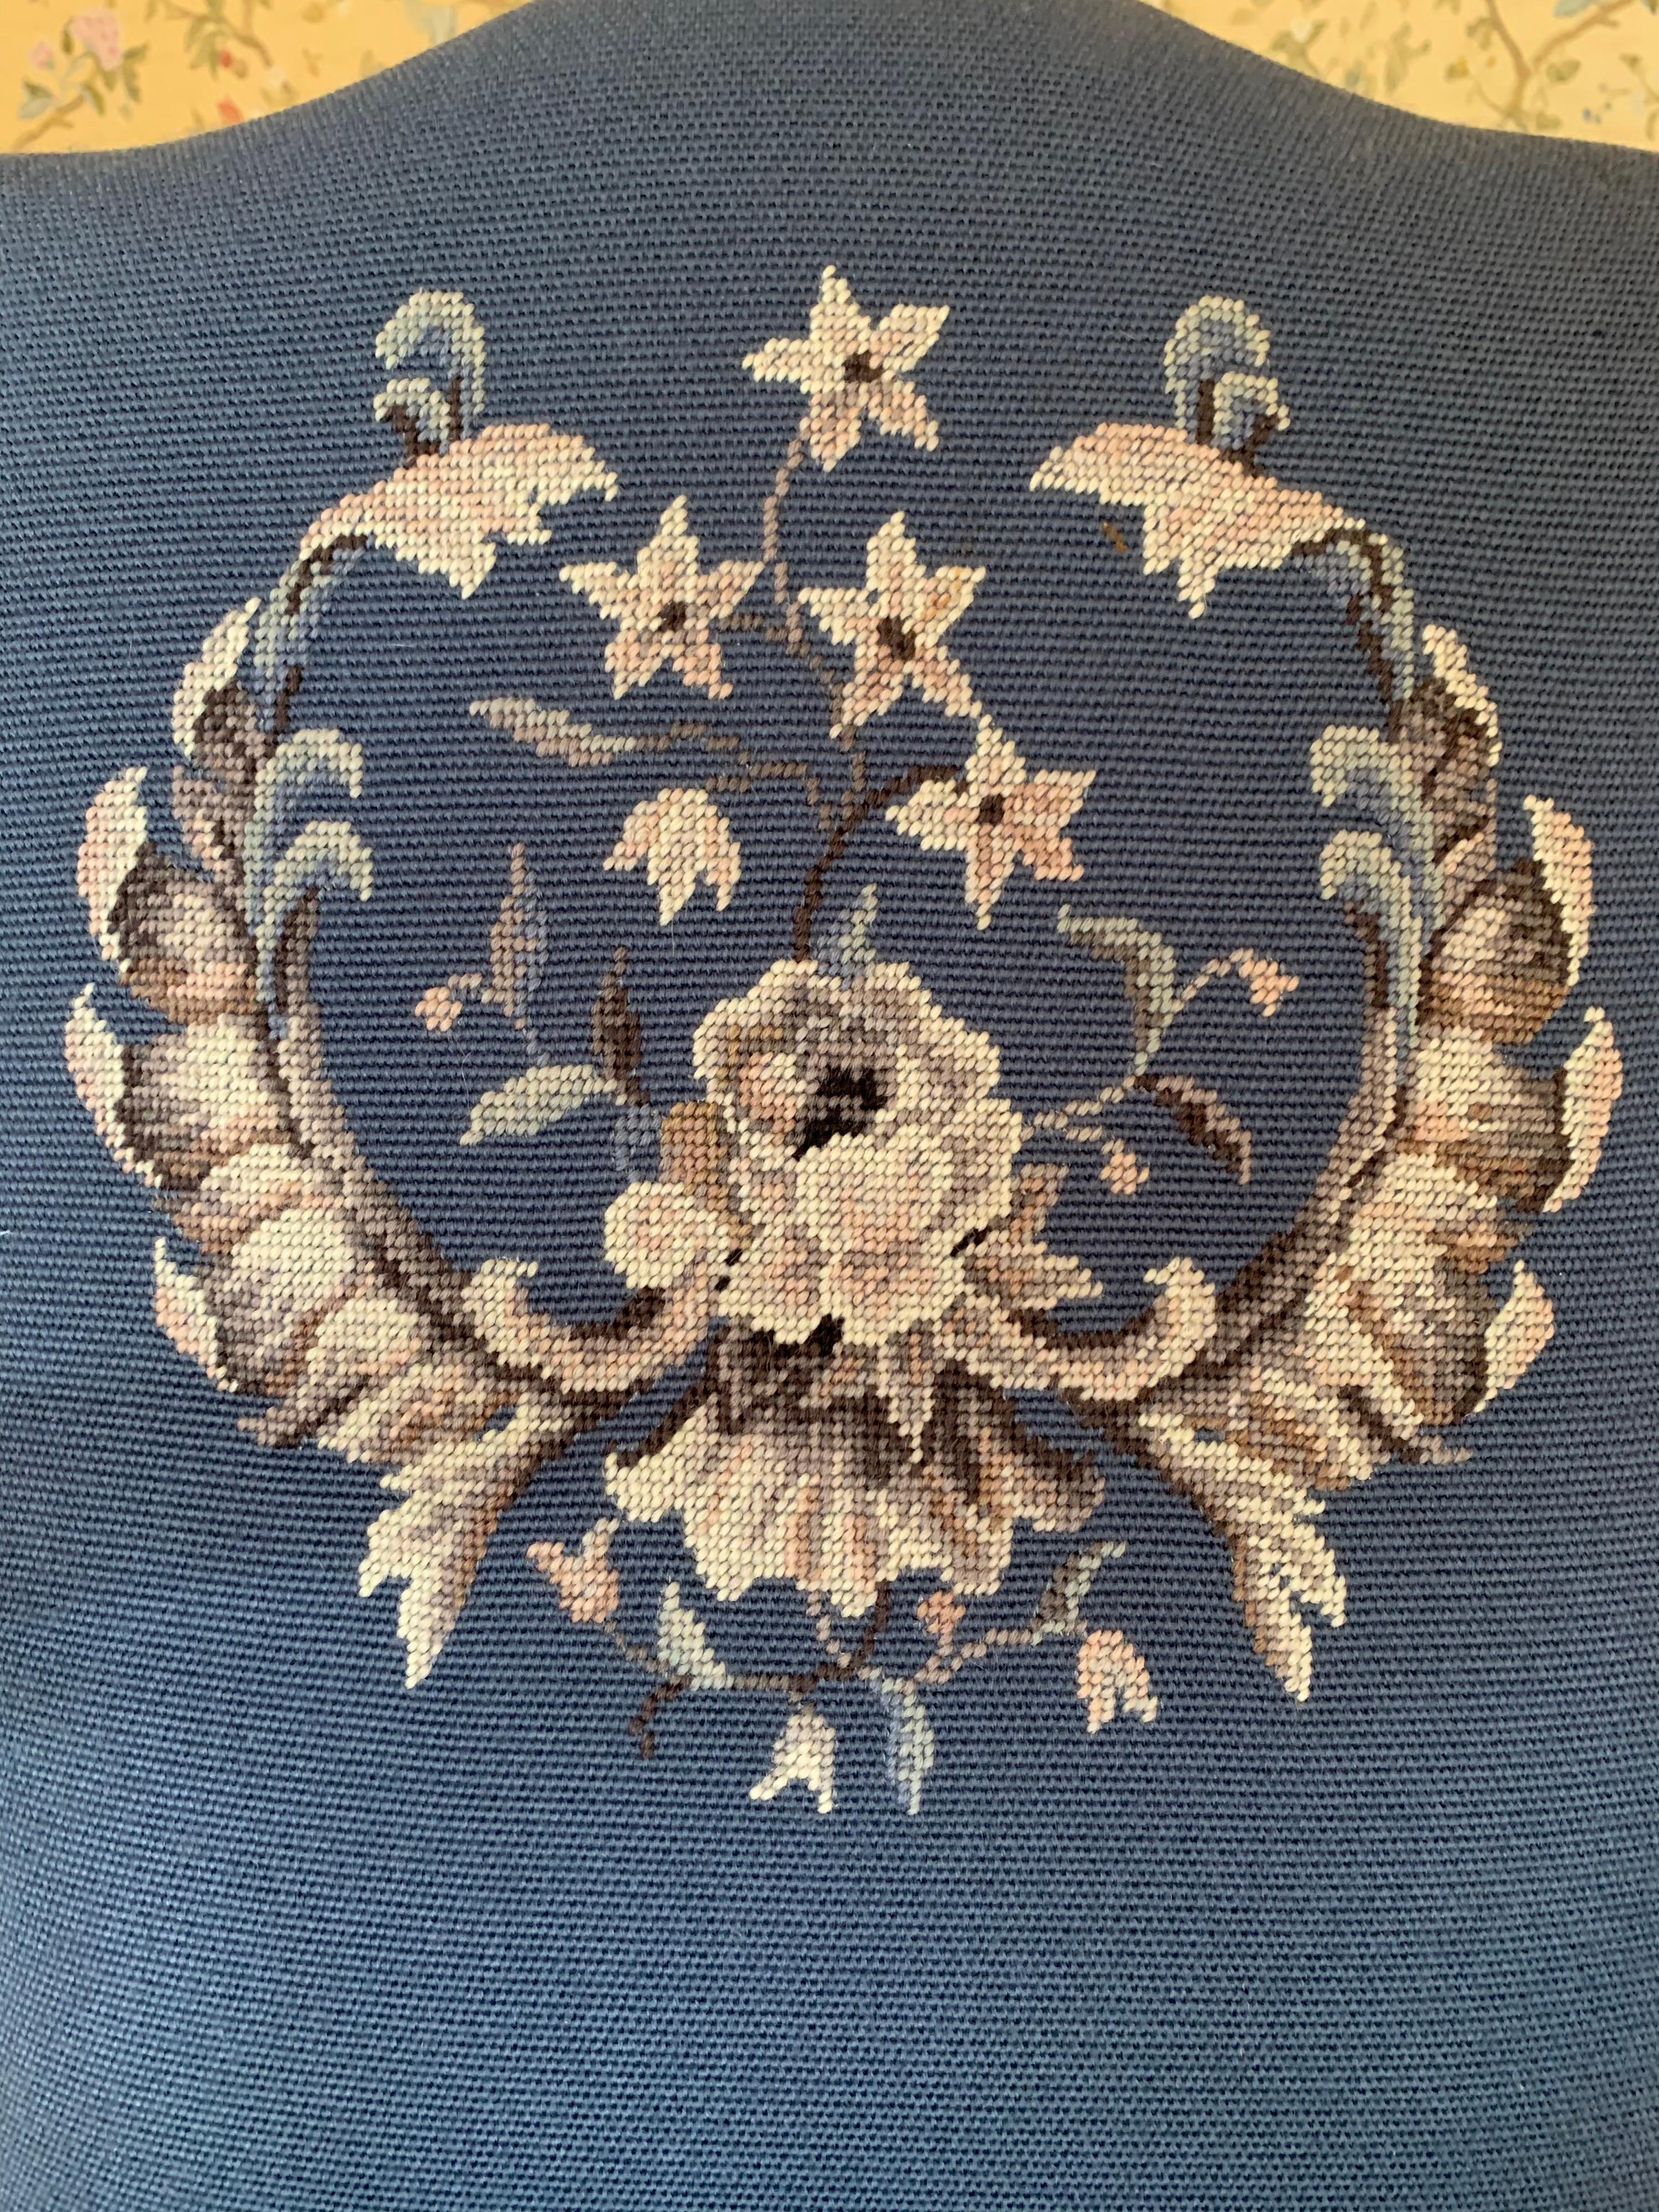 A magnificent set of six embroidered needlepoint dining chairs that have a very regal emblem at backrest. The emblem makes one think these chair belong in the White House yet they come from a grand home in Connecticut. One arm has a crack that has